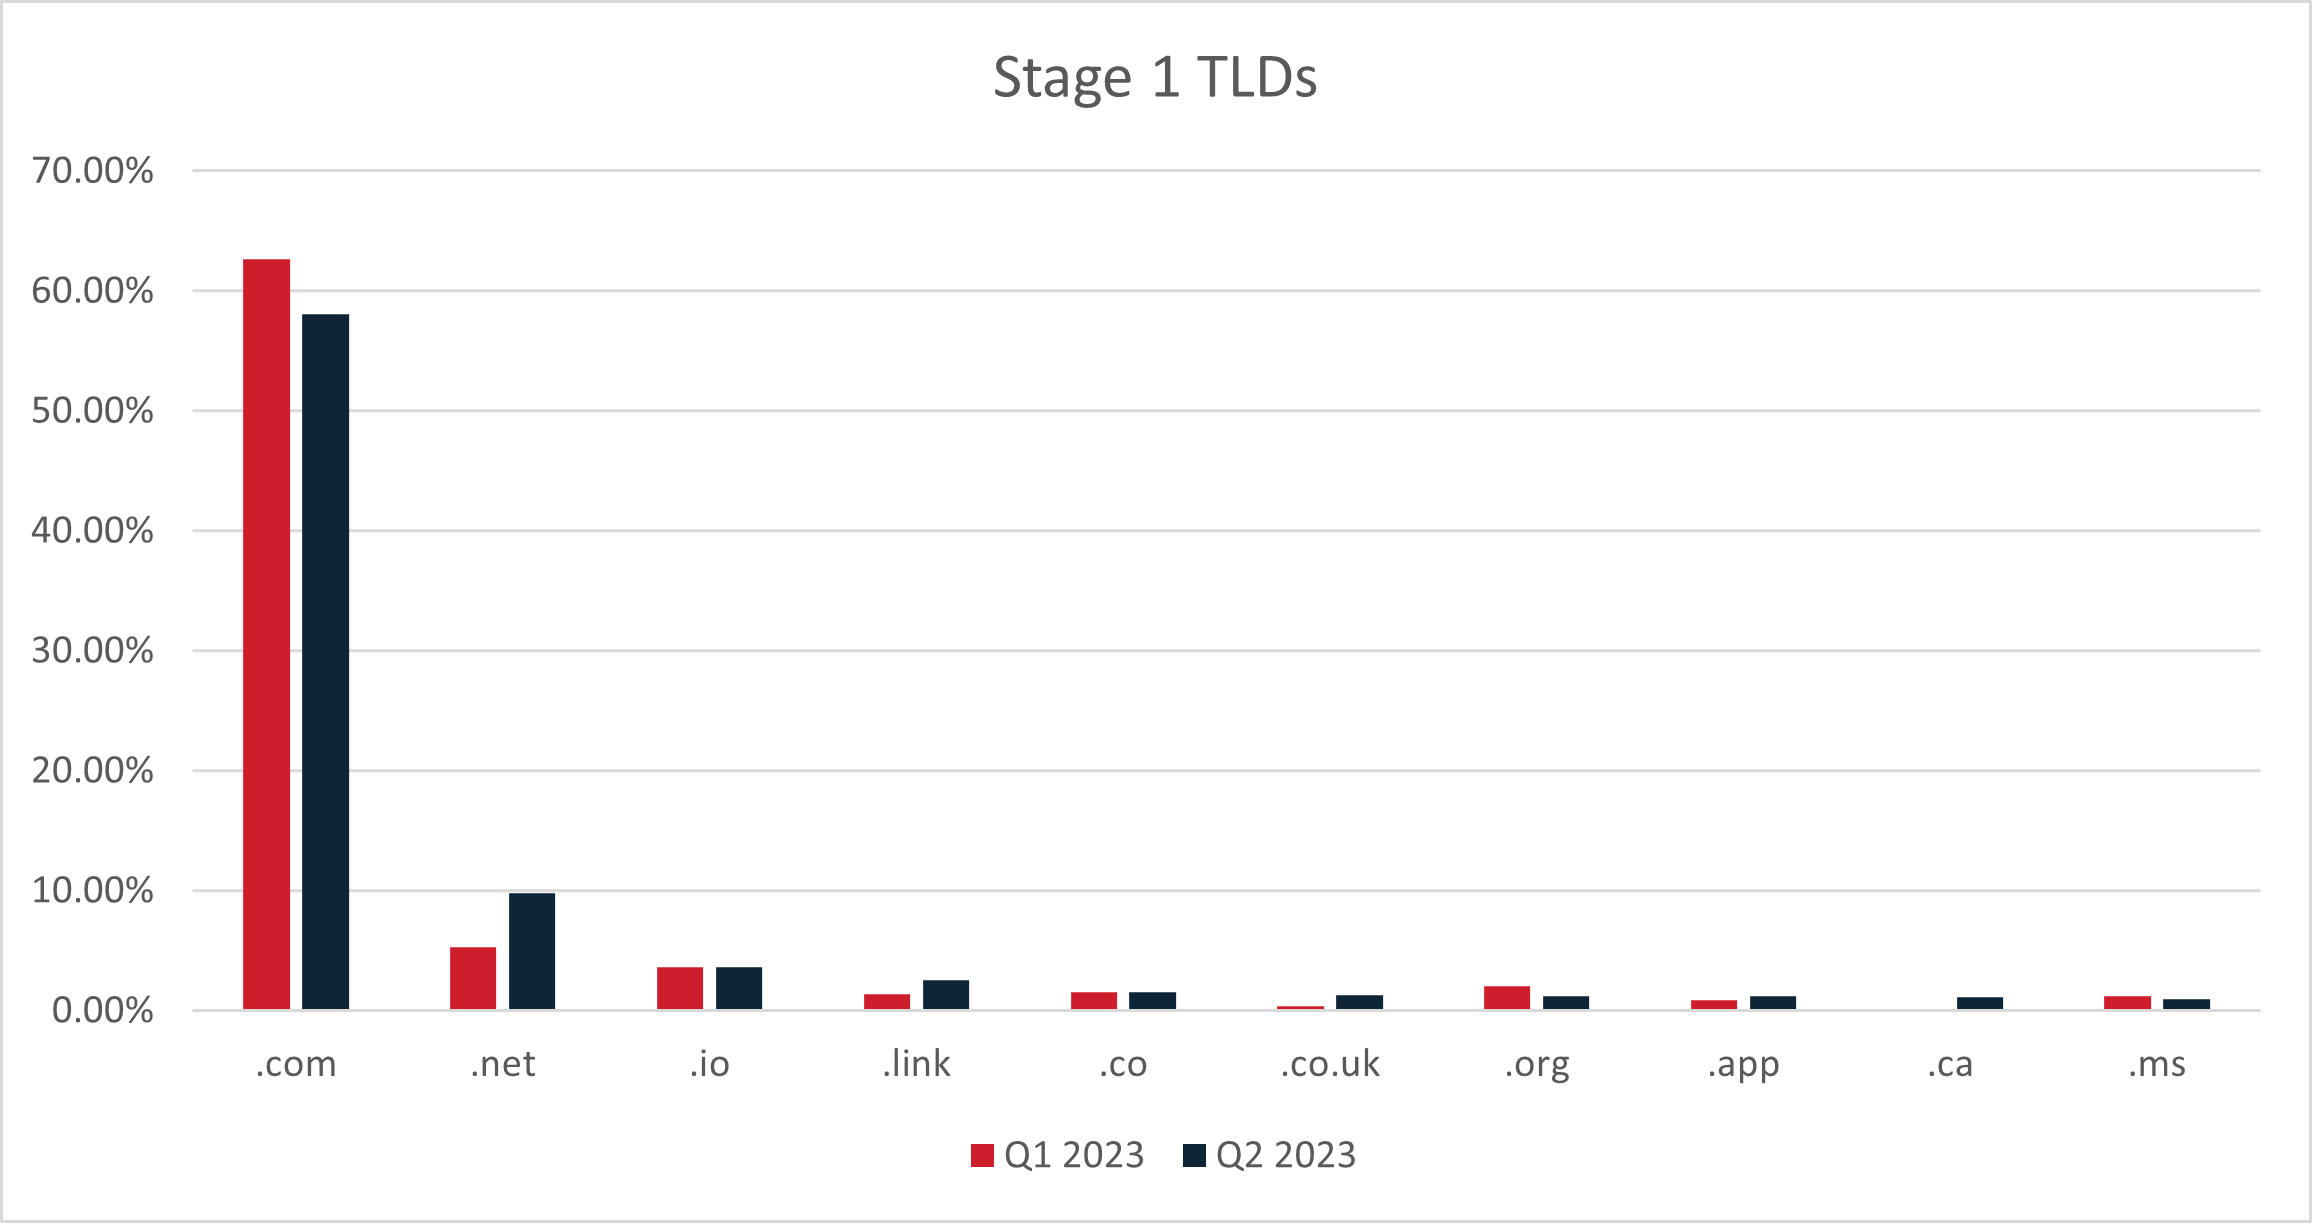 Figure 6: The top ten Stage 1 TLDs in Q2 2023, with Q1 totals for comparison.